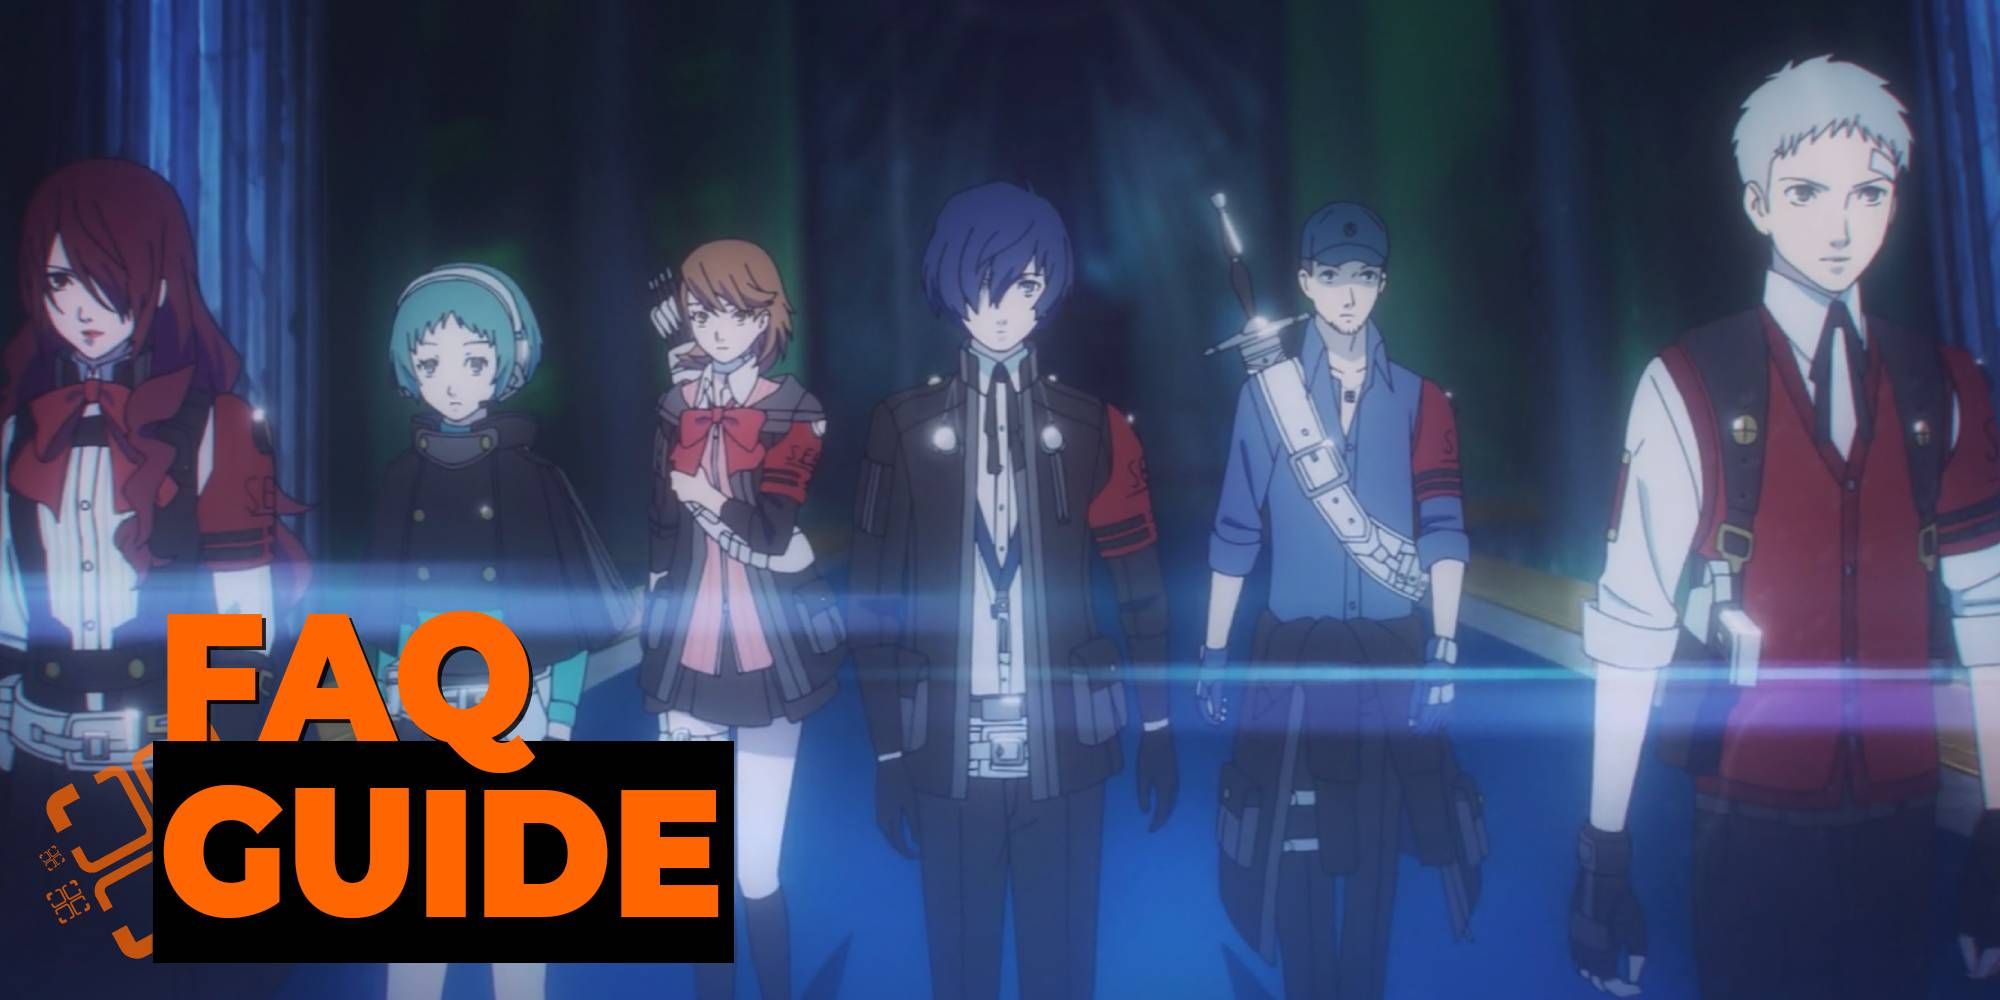 Persona 3 Reload FAQ Guide image of the party in an anime cutscene